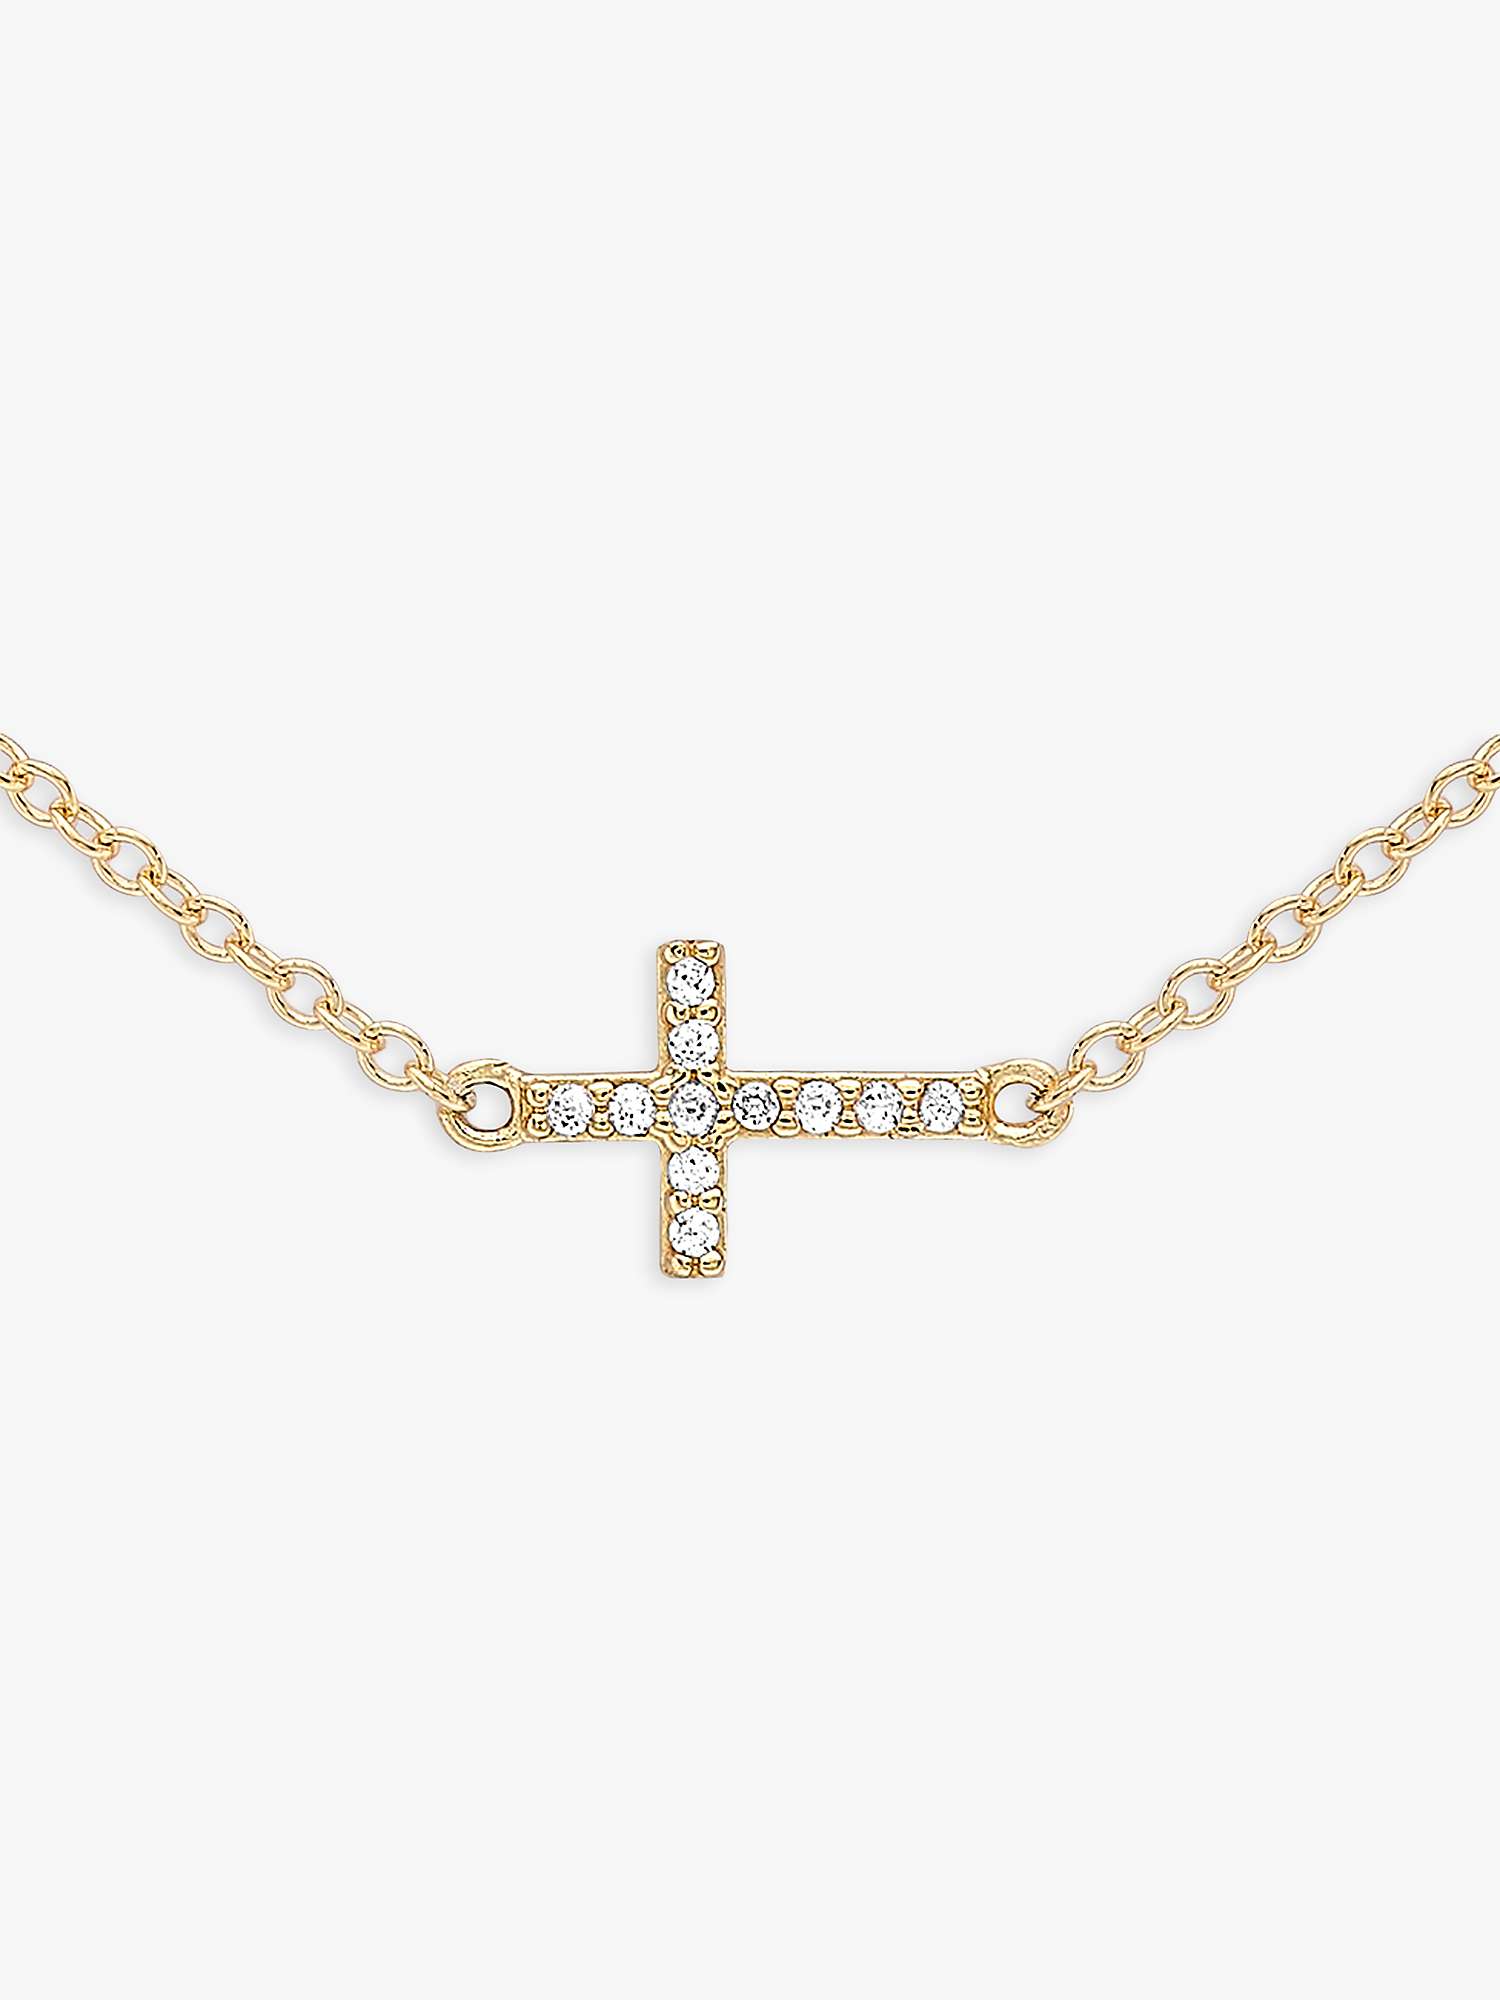 Buy IBB 9ct Gold Cubic Zirconia Triple Cross Chain Necklace Online at johnlewis.com